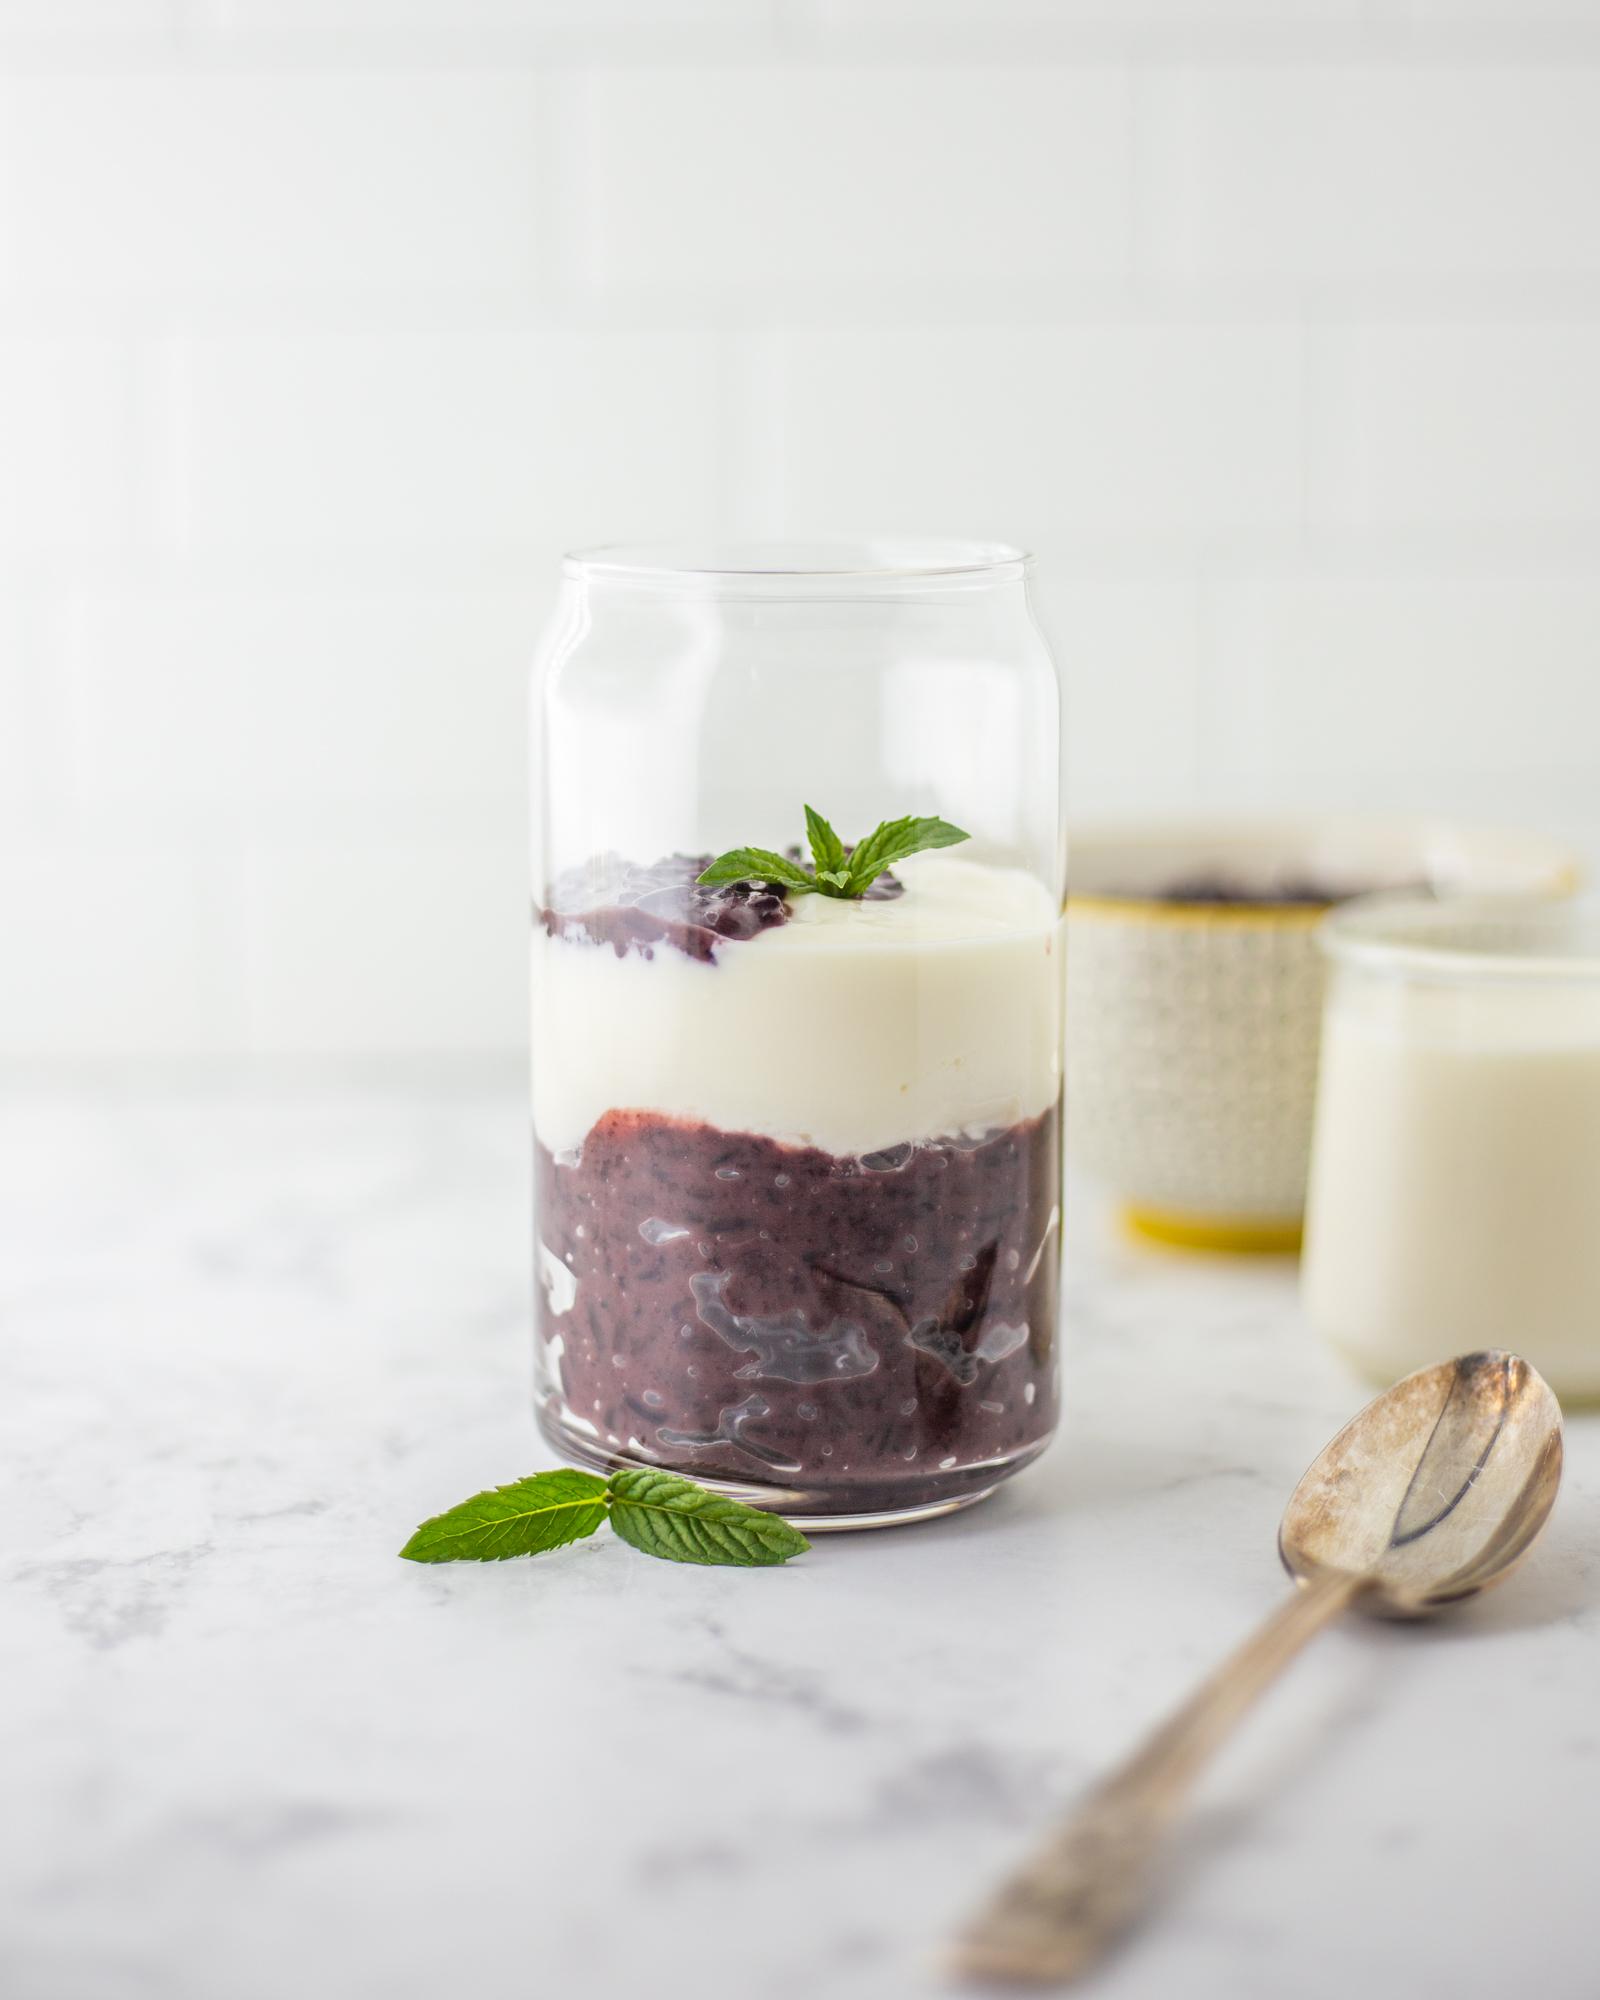 A glass filled with layers of creamy yogurt and purple sticky rice, garnished with mint leaves.